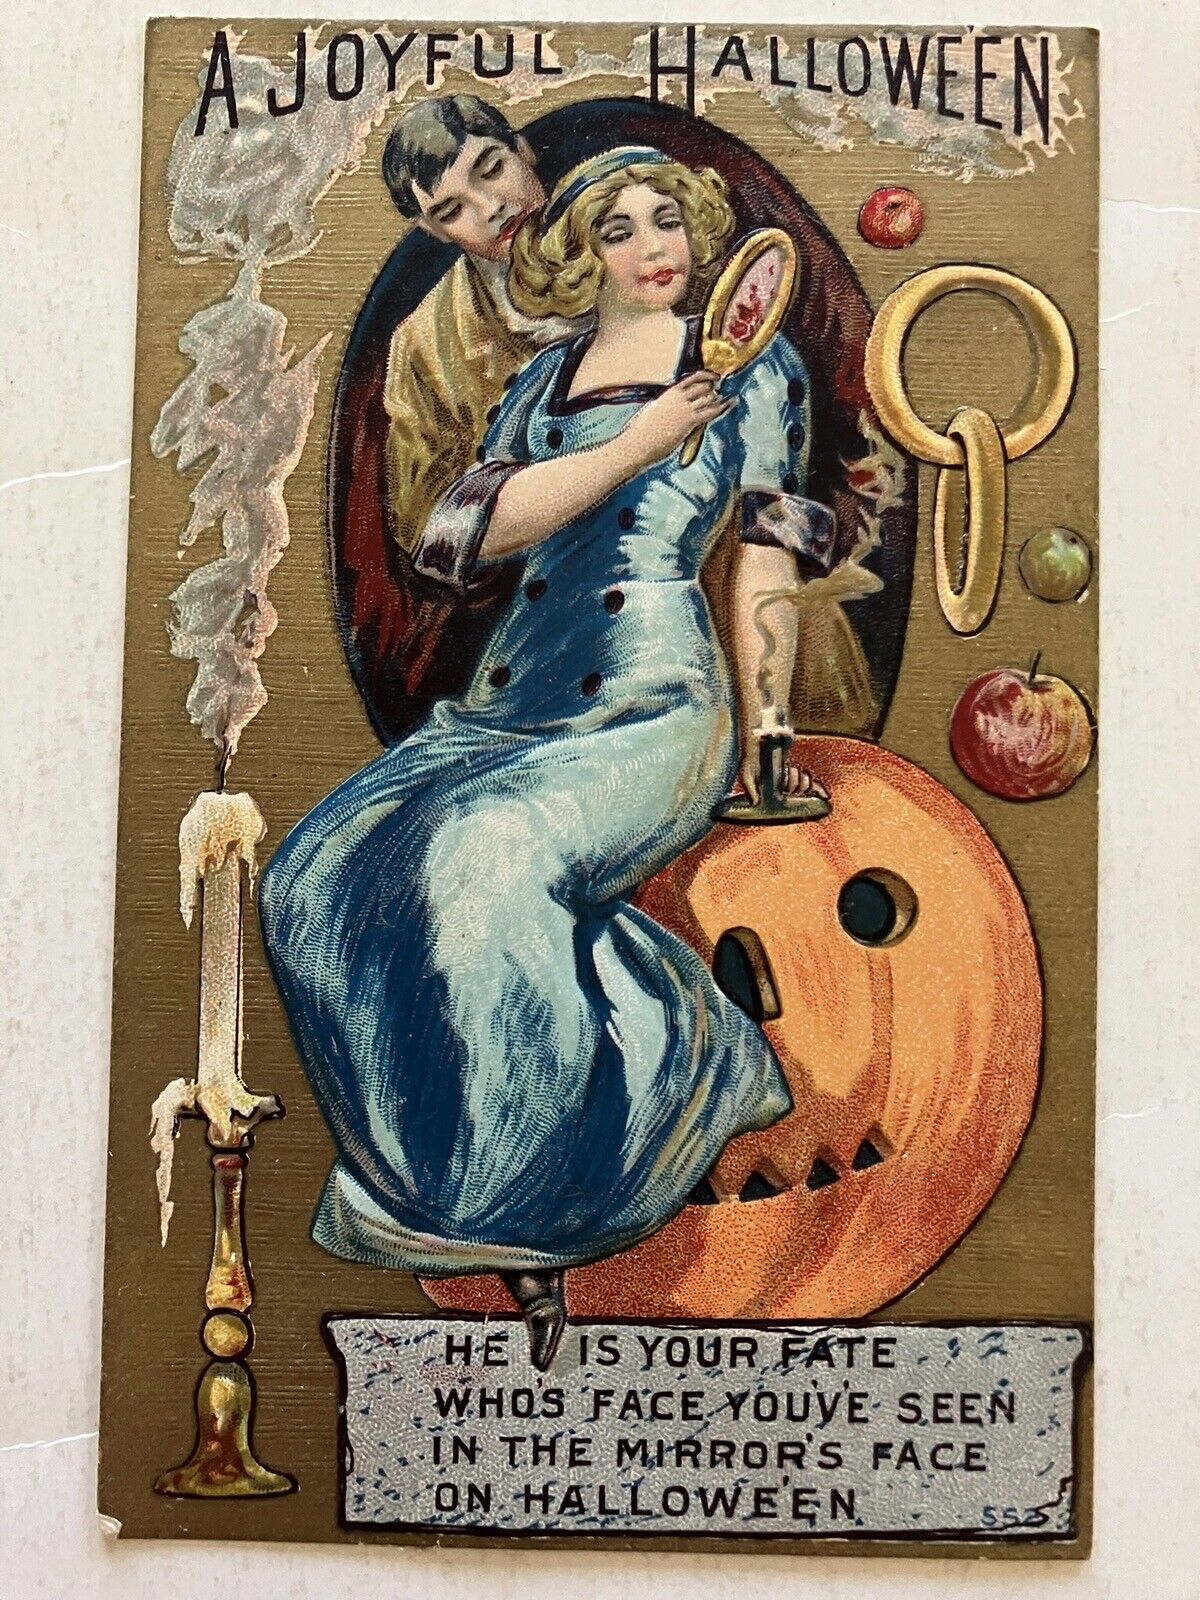 EARLY 1900’S UNKNOWN PUBL. HALLOWEEN POSTCARD  GOLD BACKGROUND MIRROR FATE